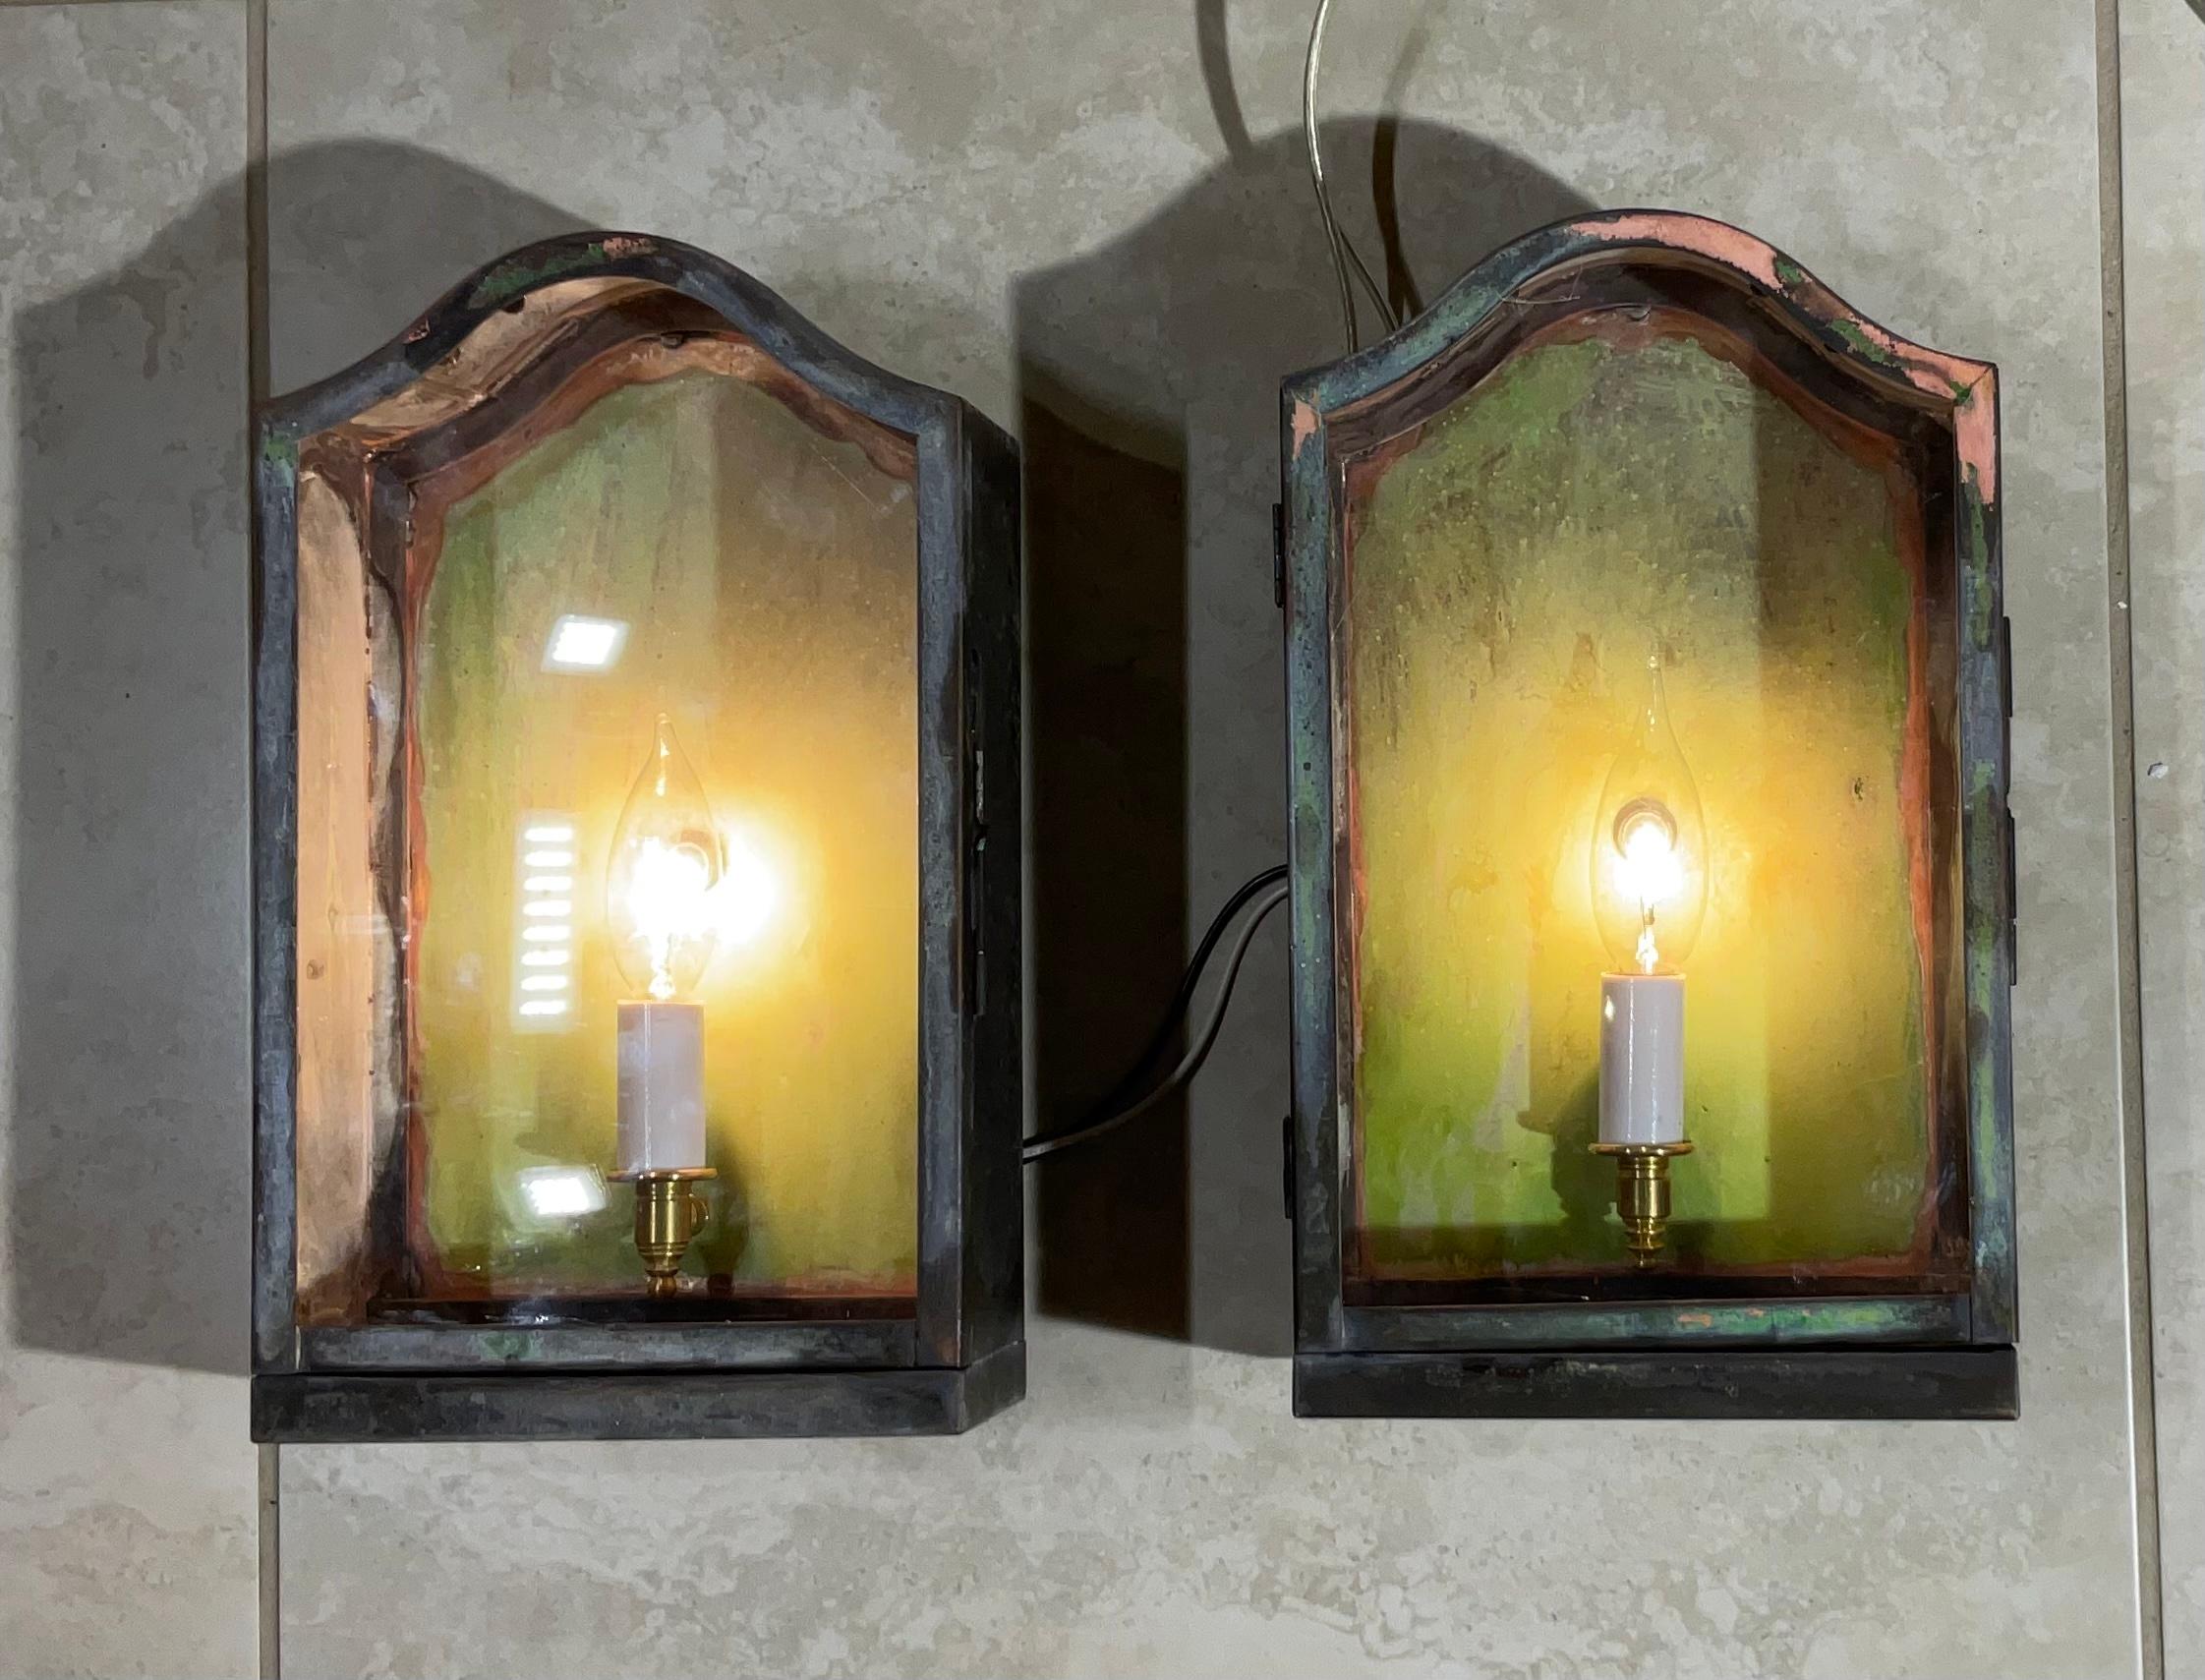 Elegant pair of vintage wall lantern, hand crafted from solid brass with one 60/watt light each. Suitable for wet location.
This pair of lantern was originally from estate in Miami Beach, professionally restored and newly electrified. One 60/watt